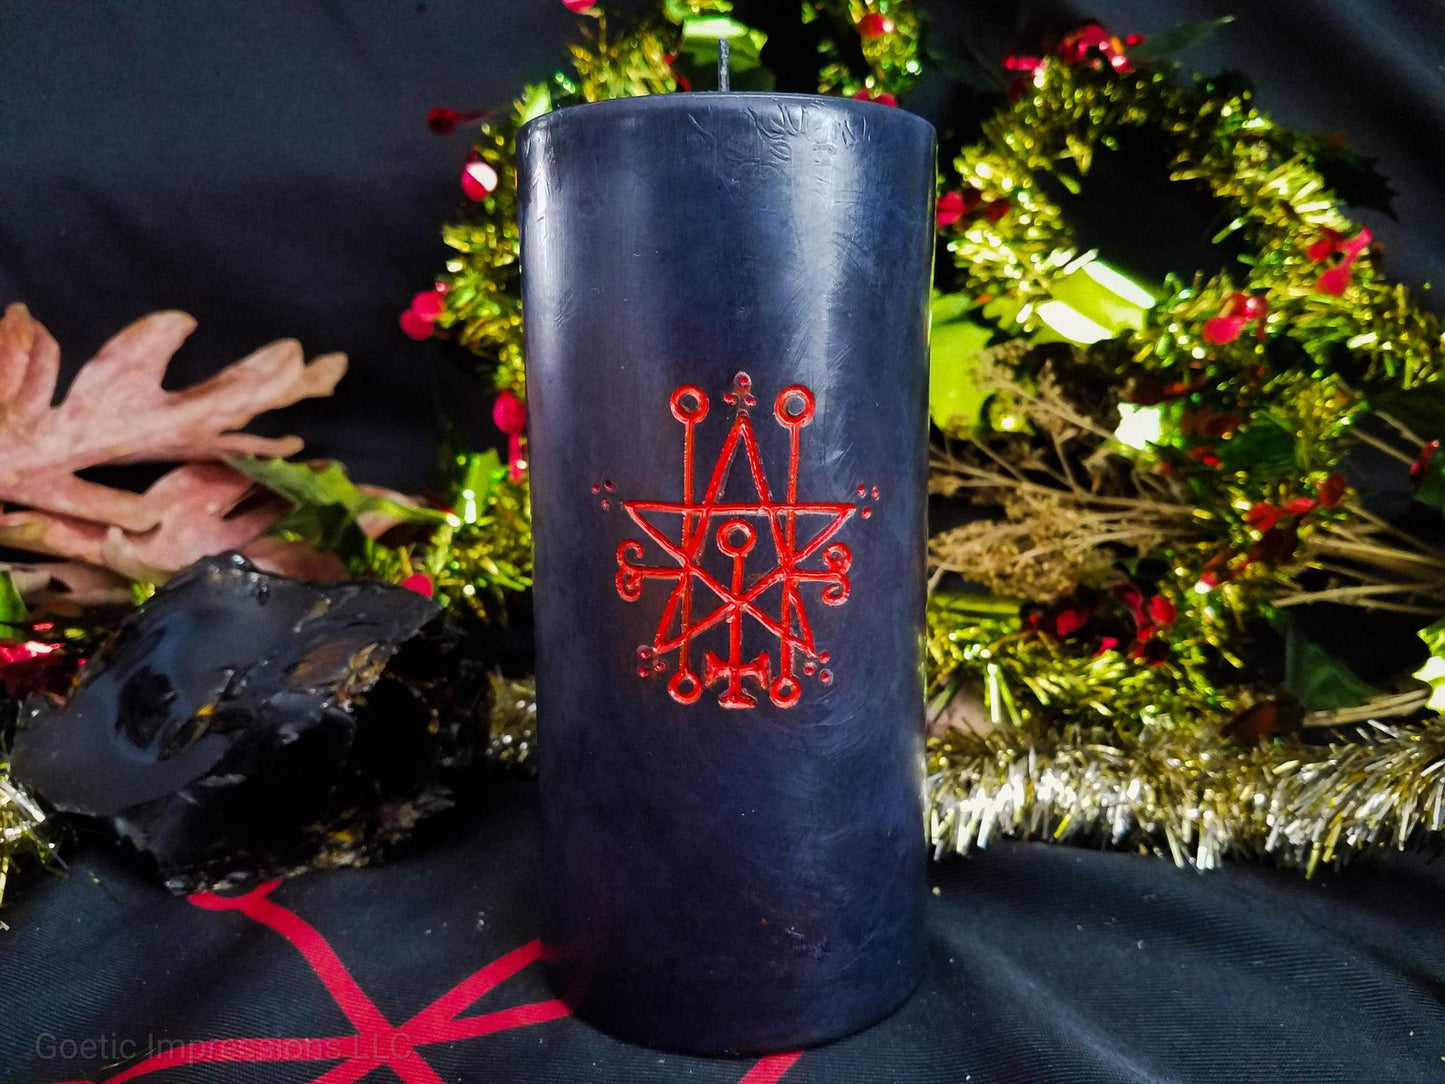 Black pillar candle with Red Astaroth sigil carved into it